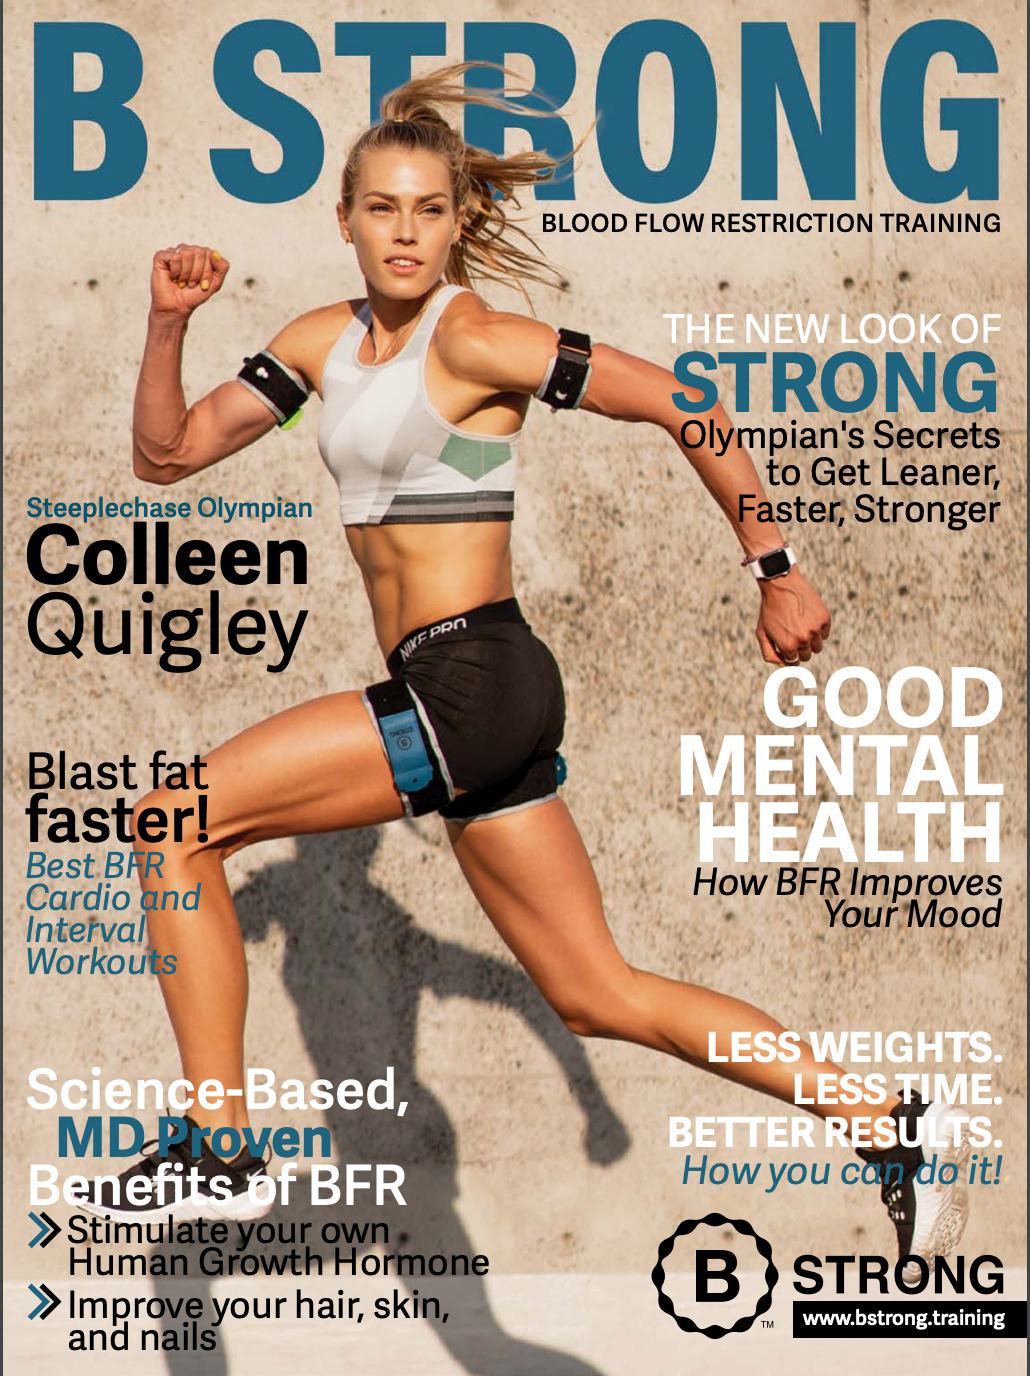 Olympic athlete, Colleen Quigley, shares why training with Blood Flow Restriction (BFR) is giving her an advantage